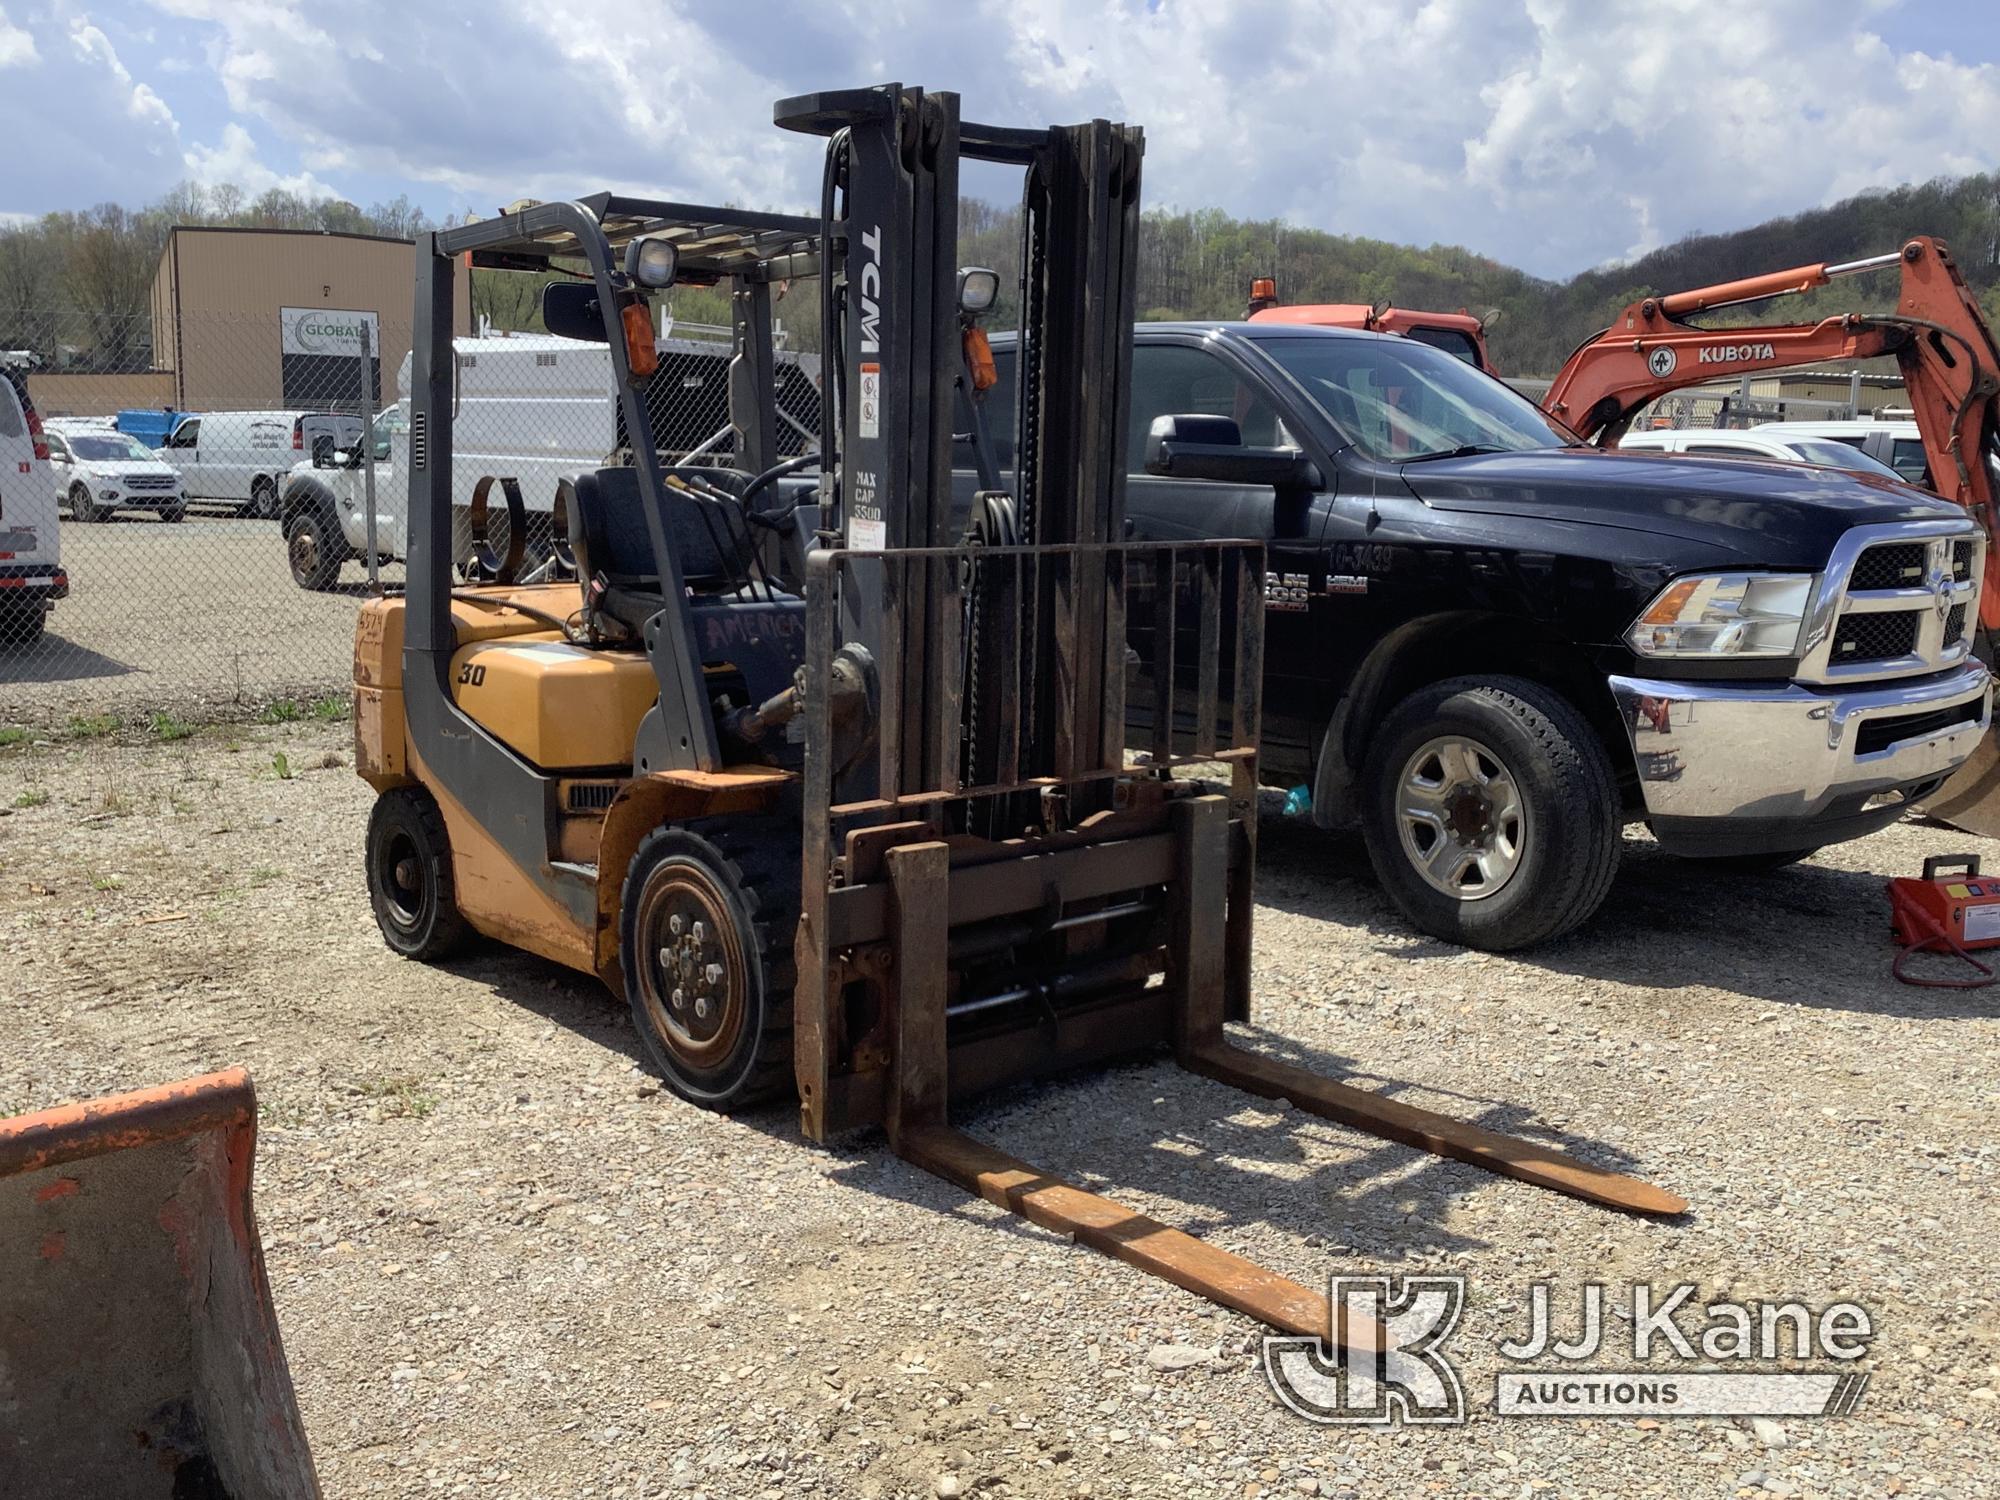 (Smock, PA) TCM FG30T7L Forklift Not Running, Condition Unknown